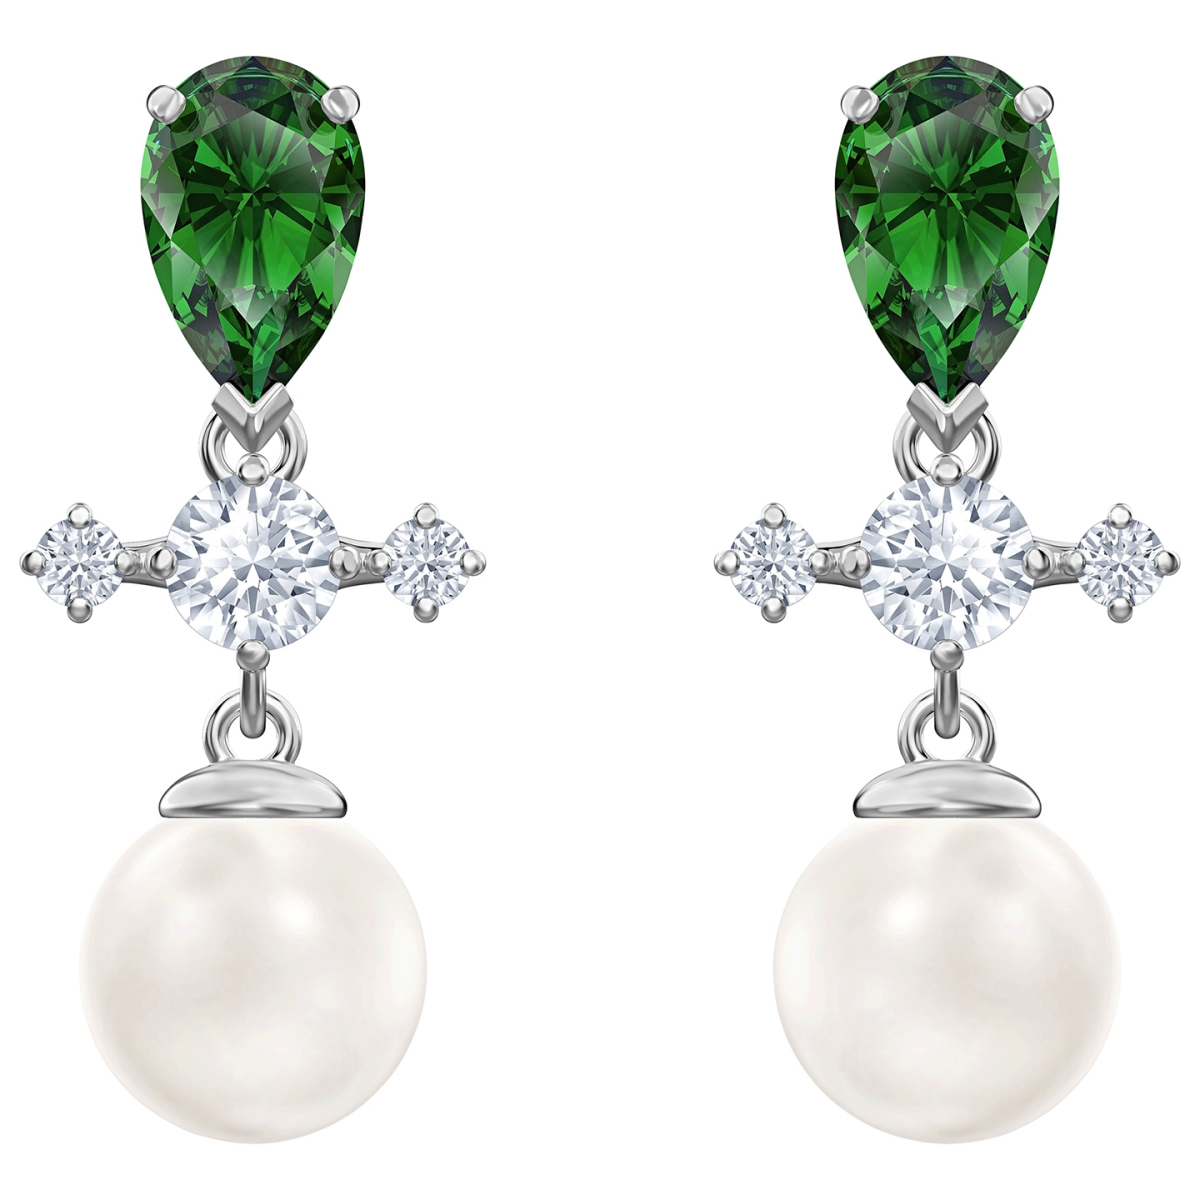 5489440 Perfection Drop Pierced Earrings, Rhodium Plated, Green